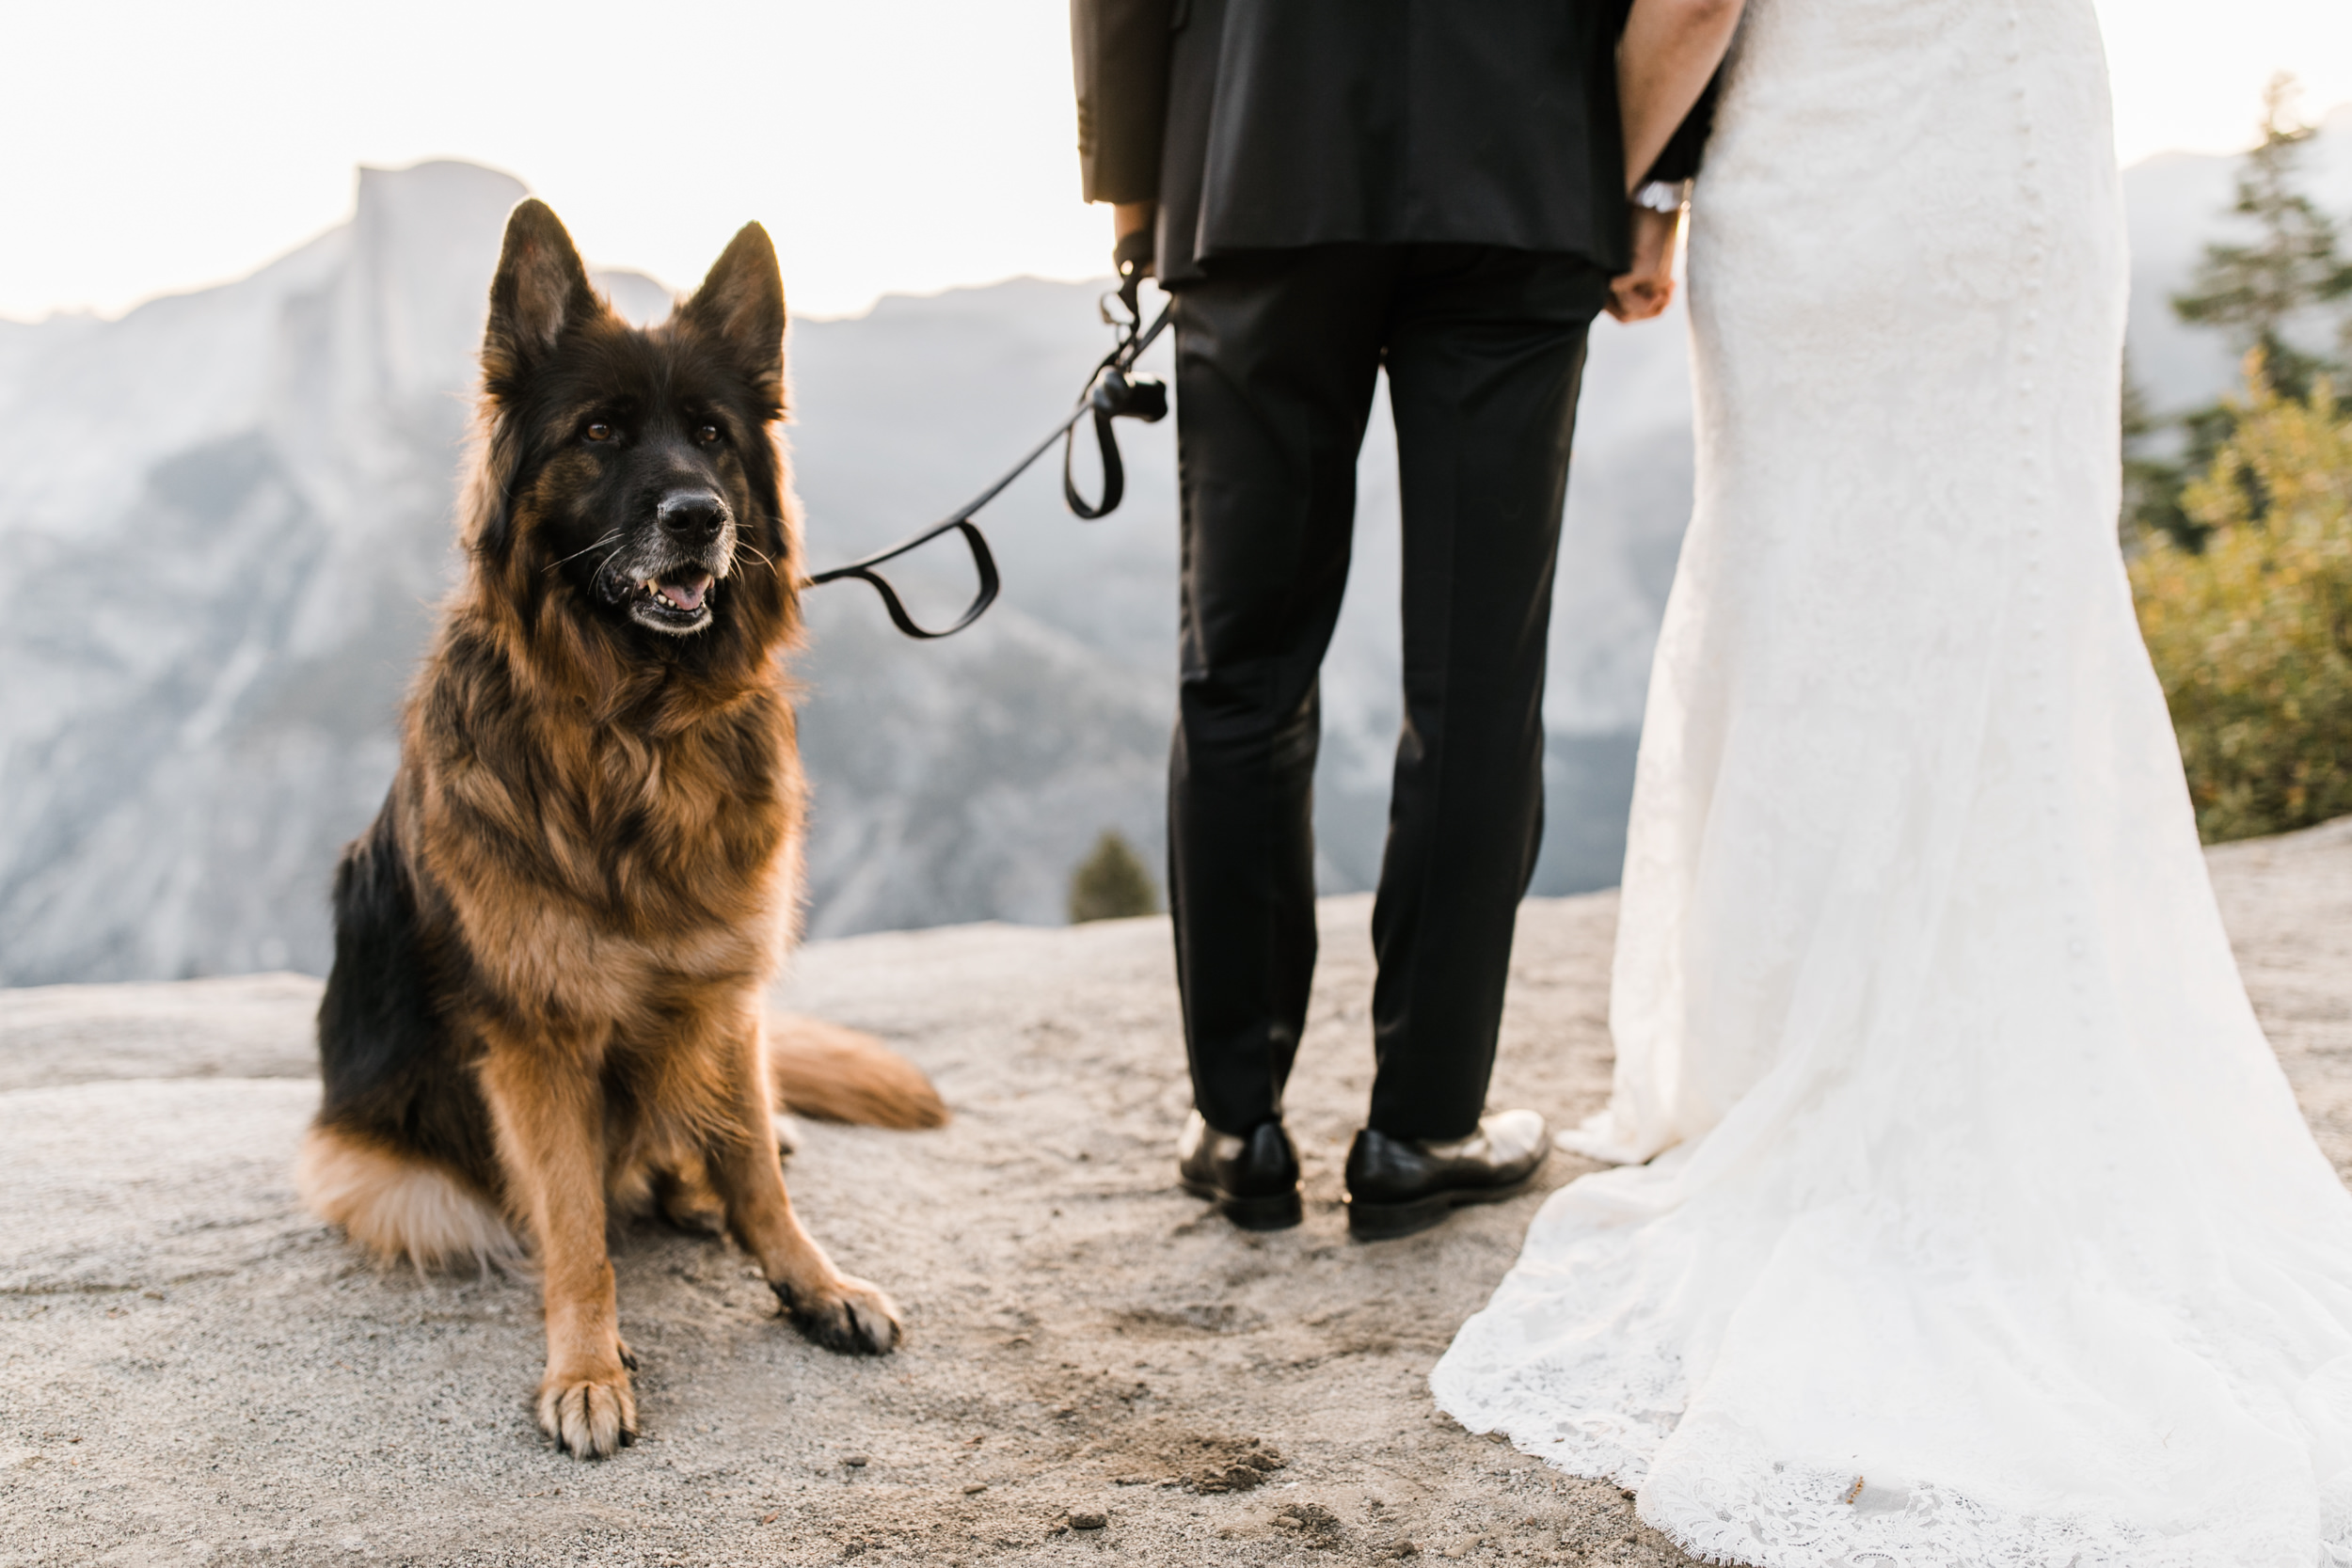 first look and wedding portraits at glacier point | bride and groom with a dog | yosemite national park elopement photographer | the hearnes adventure photography 